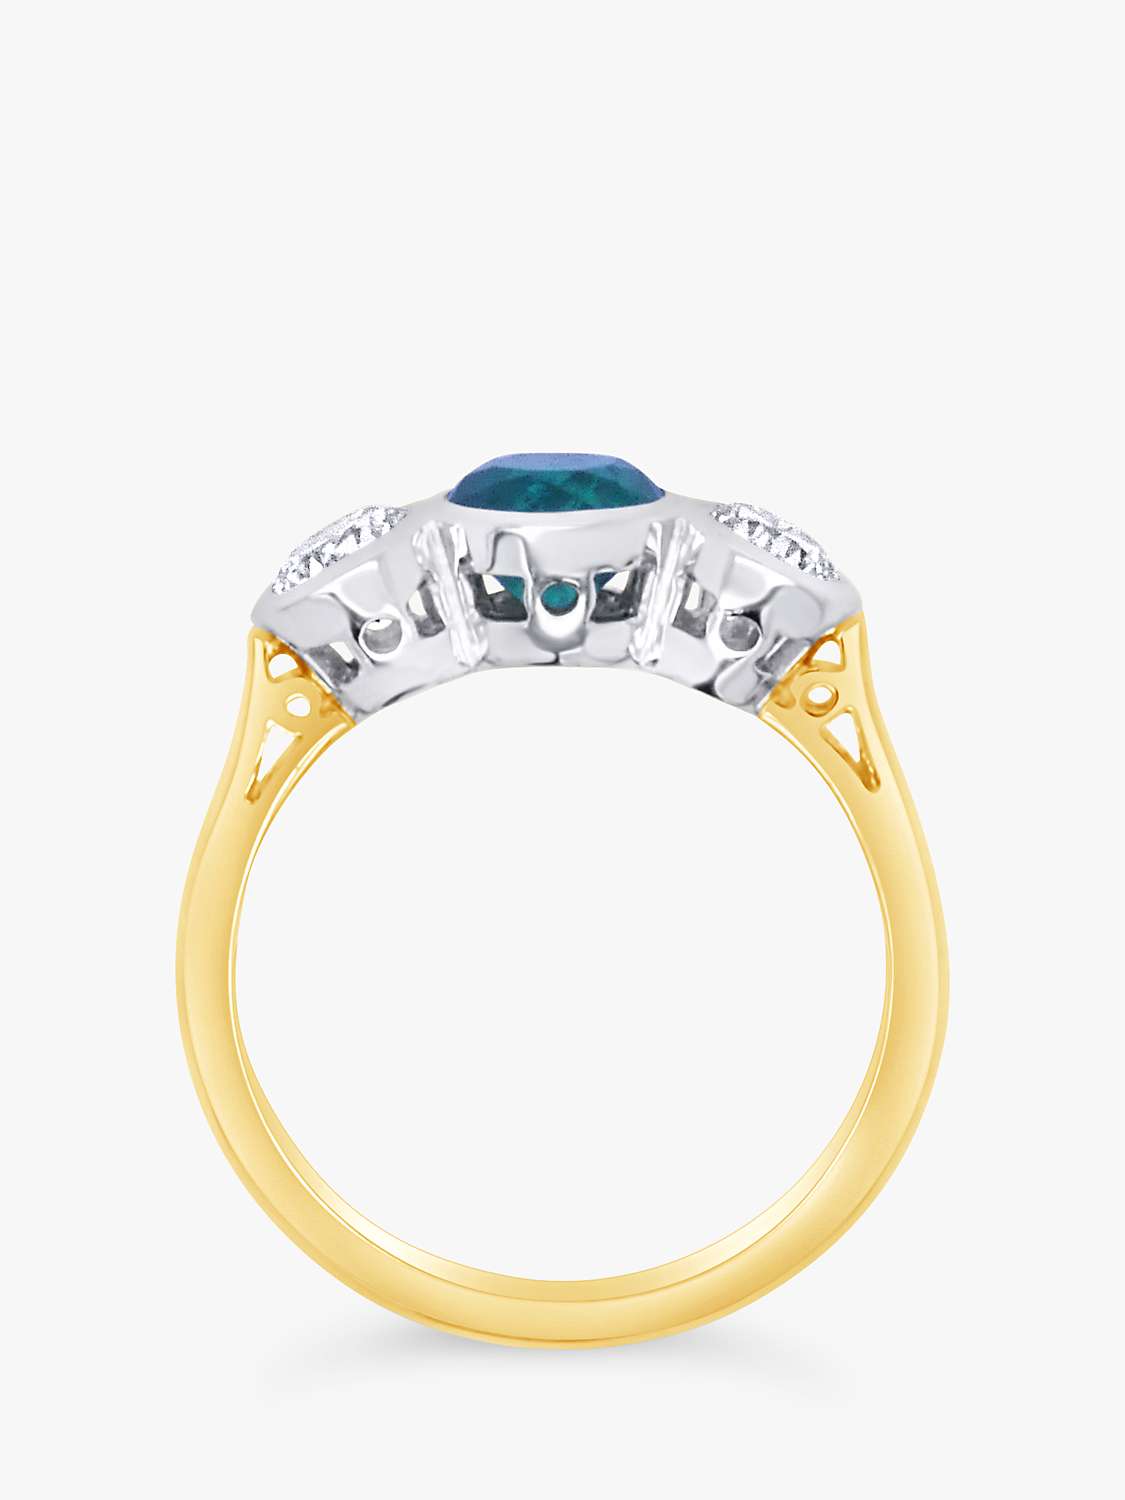 Buy Milton & Humble Jewellery 18ct White and Yellow Gold Second Hand Emerald and Diamond Ring Online at johnlewis.com